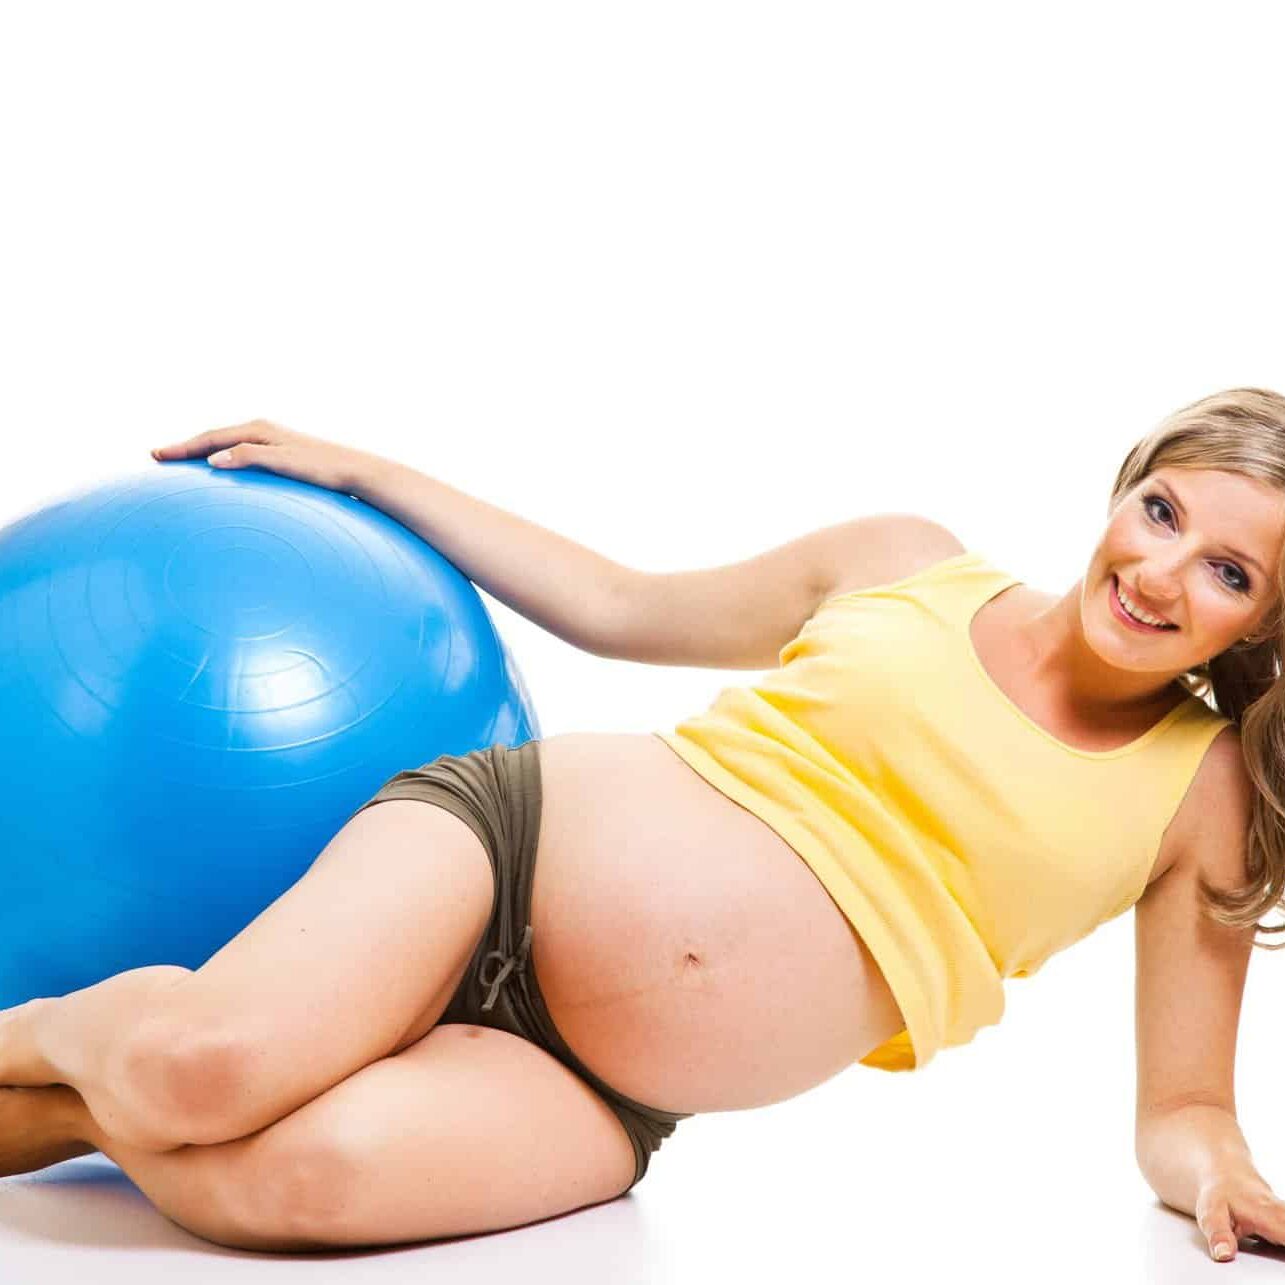 A pregnant woman laying on a blue exercise ball.